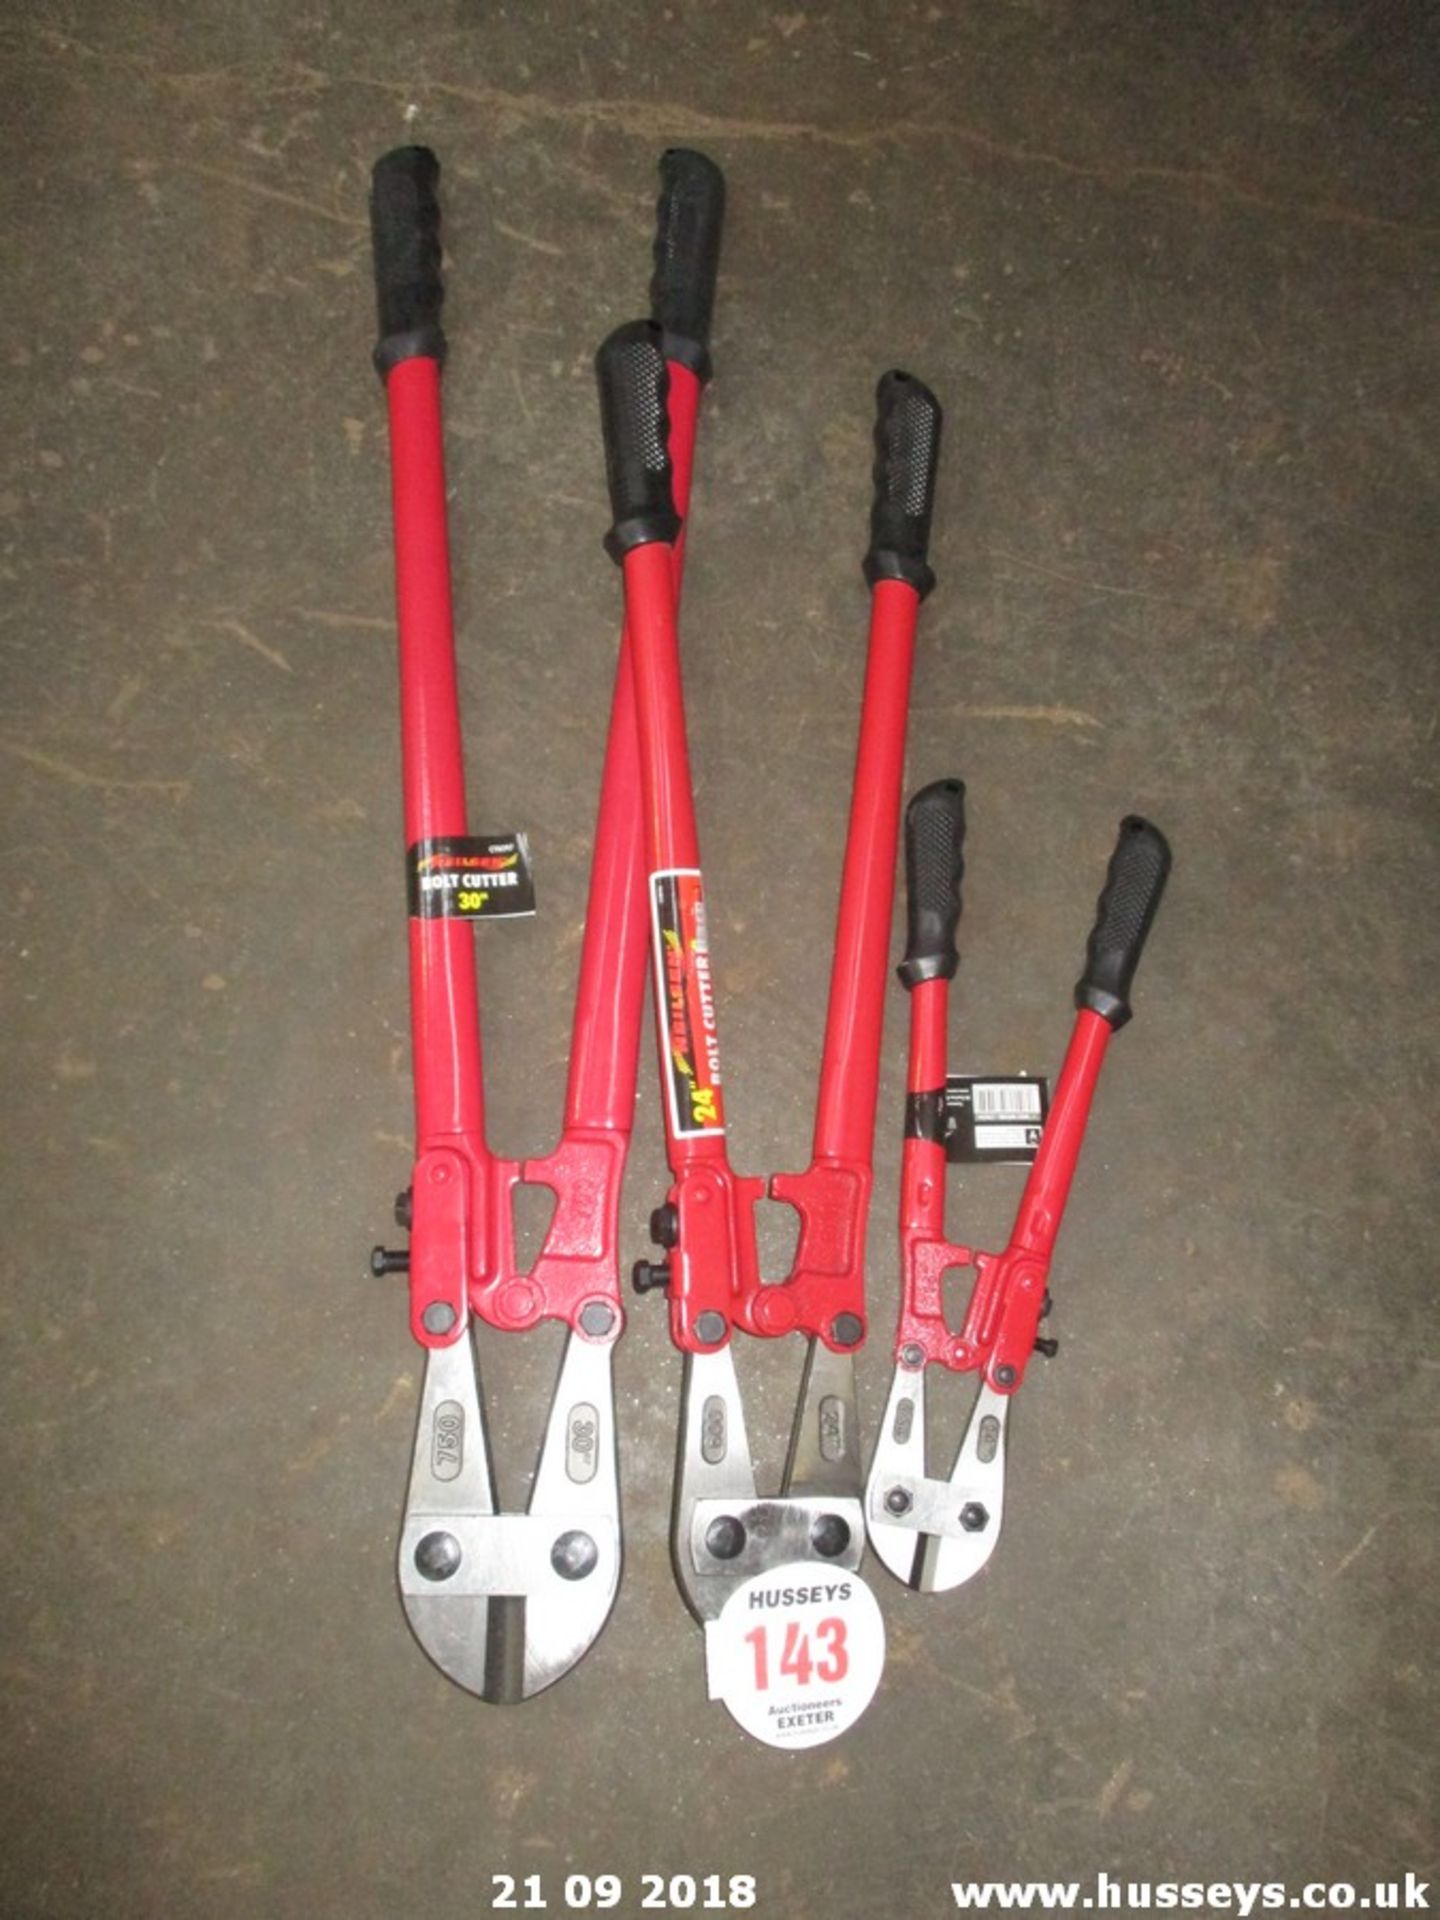 3PRS OF BOLT CROPPERS